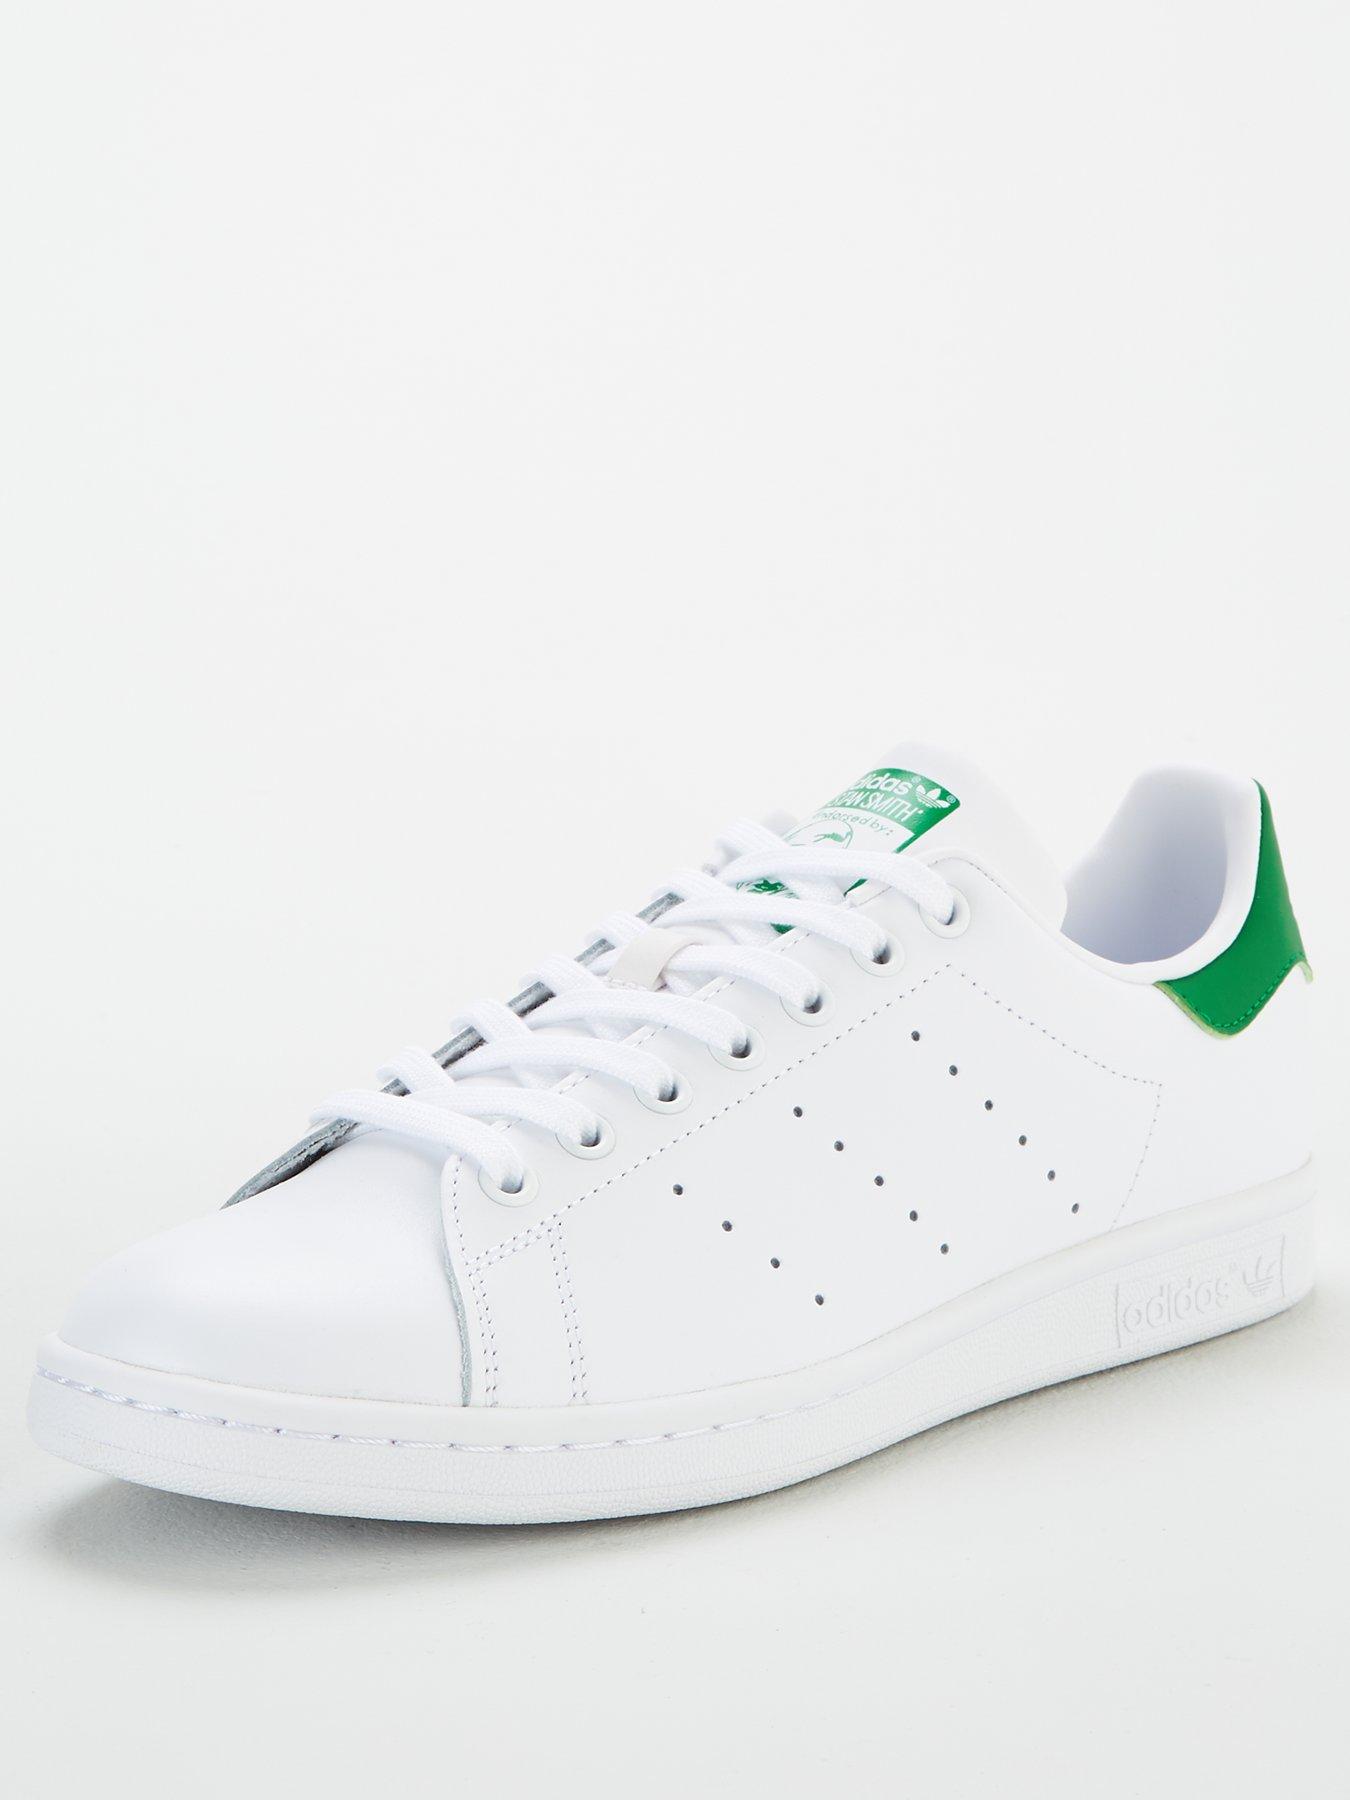 green and white adidas